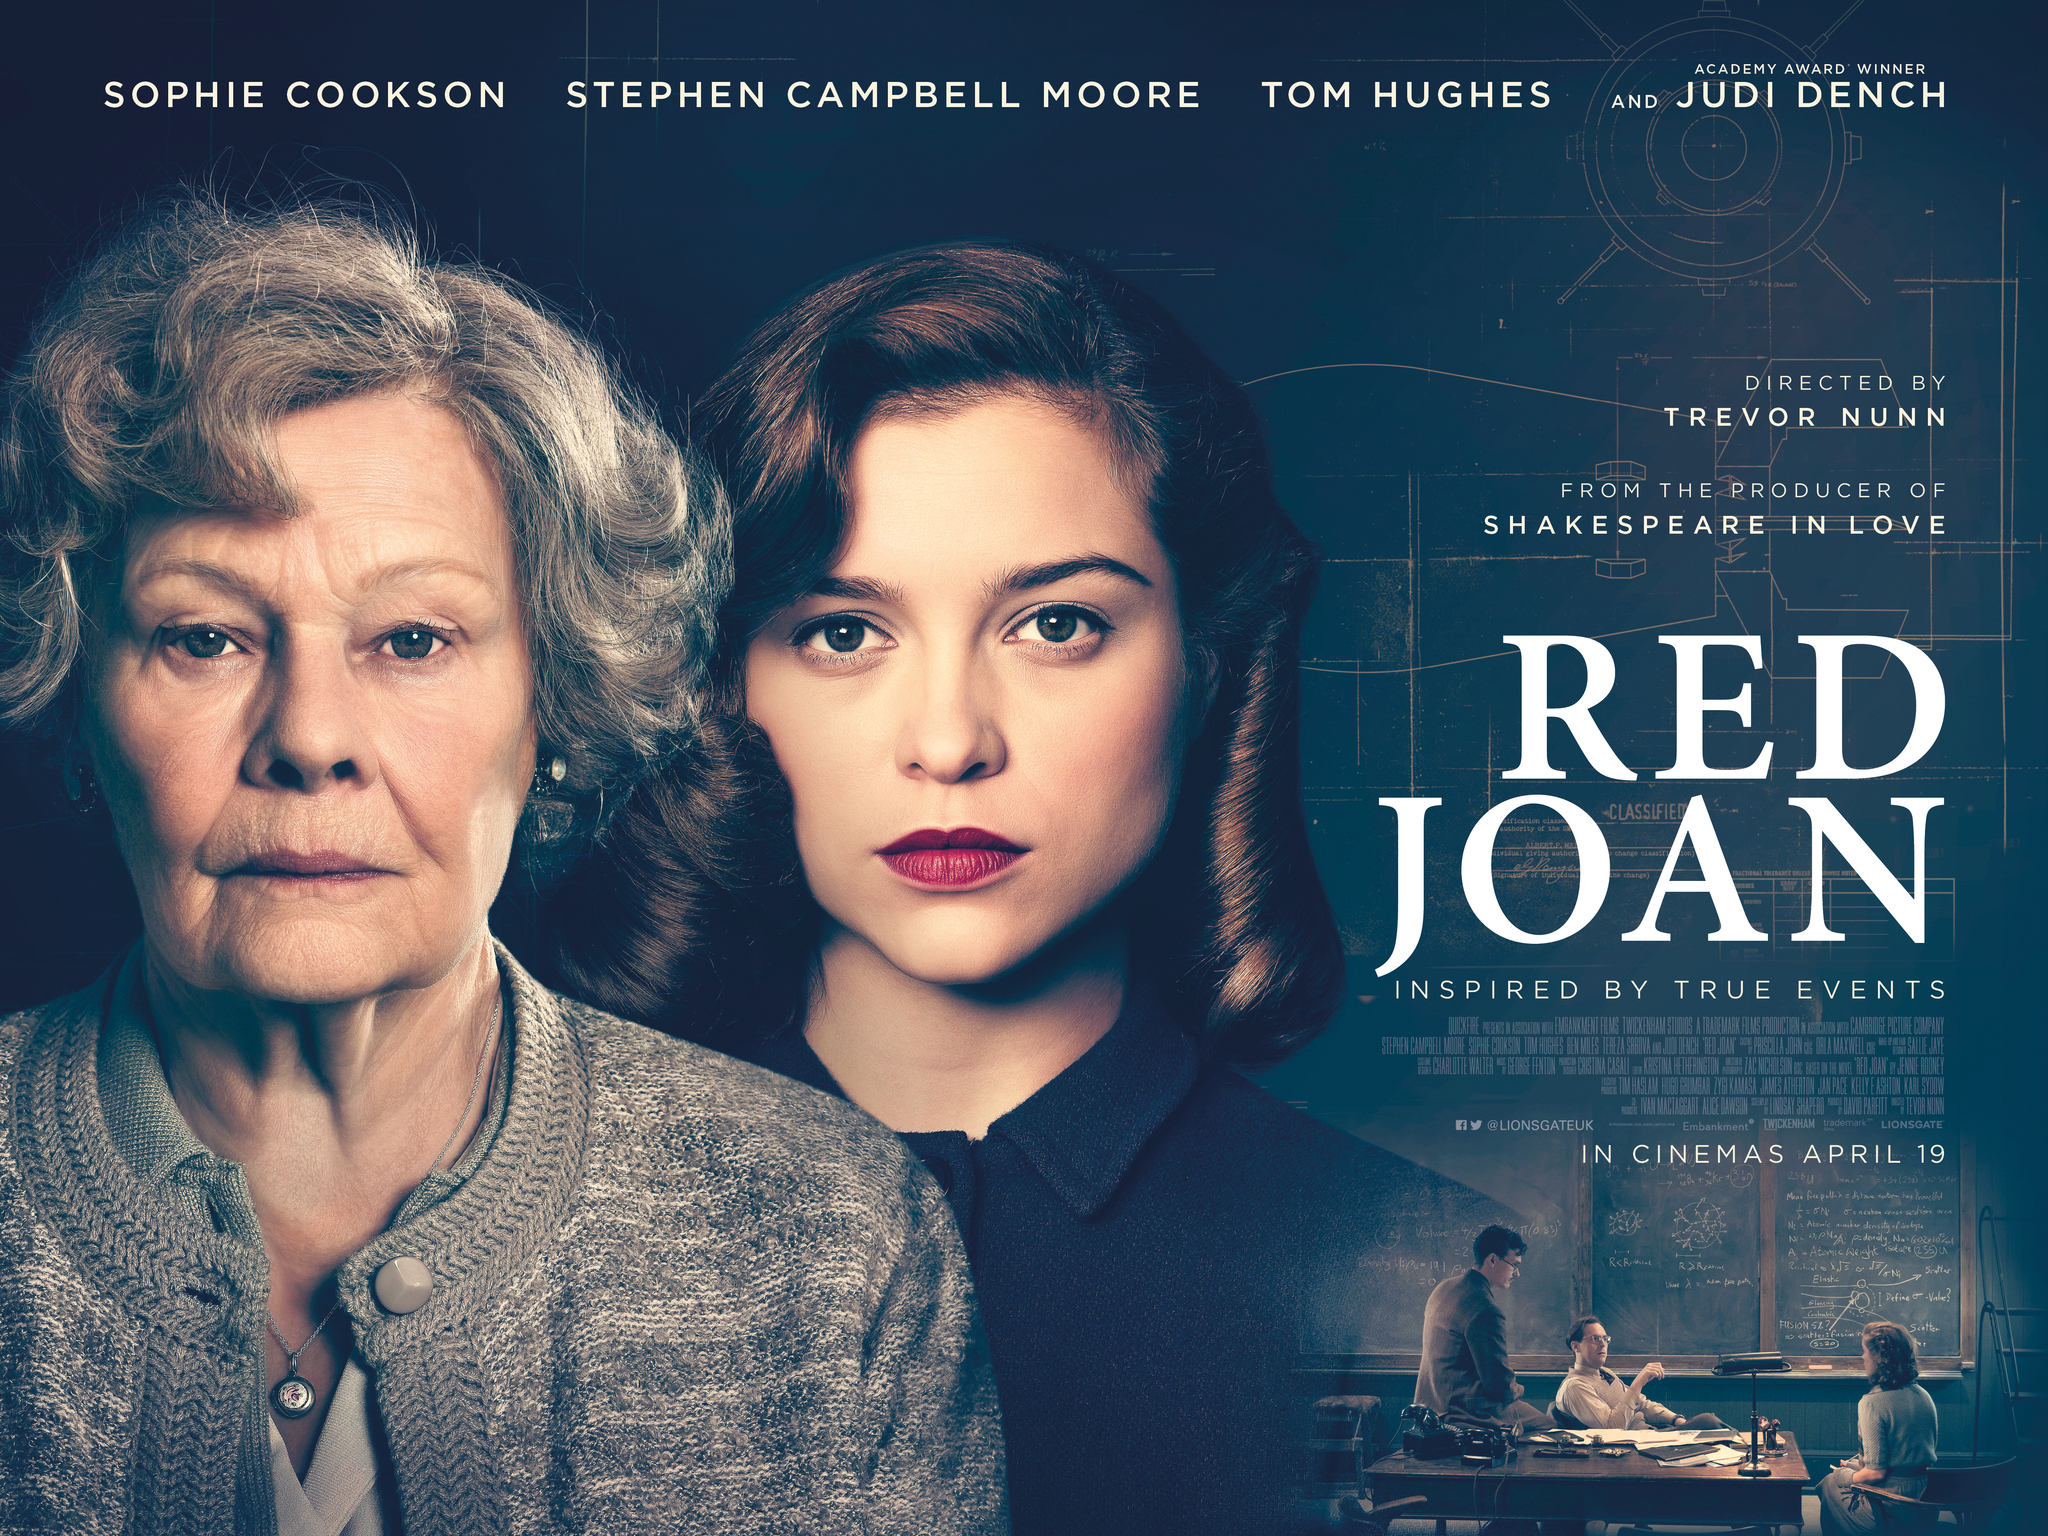 "Red Joan" (2018)